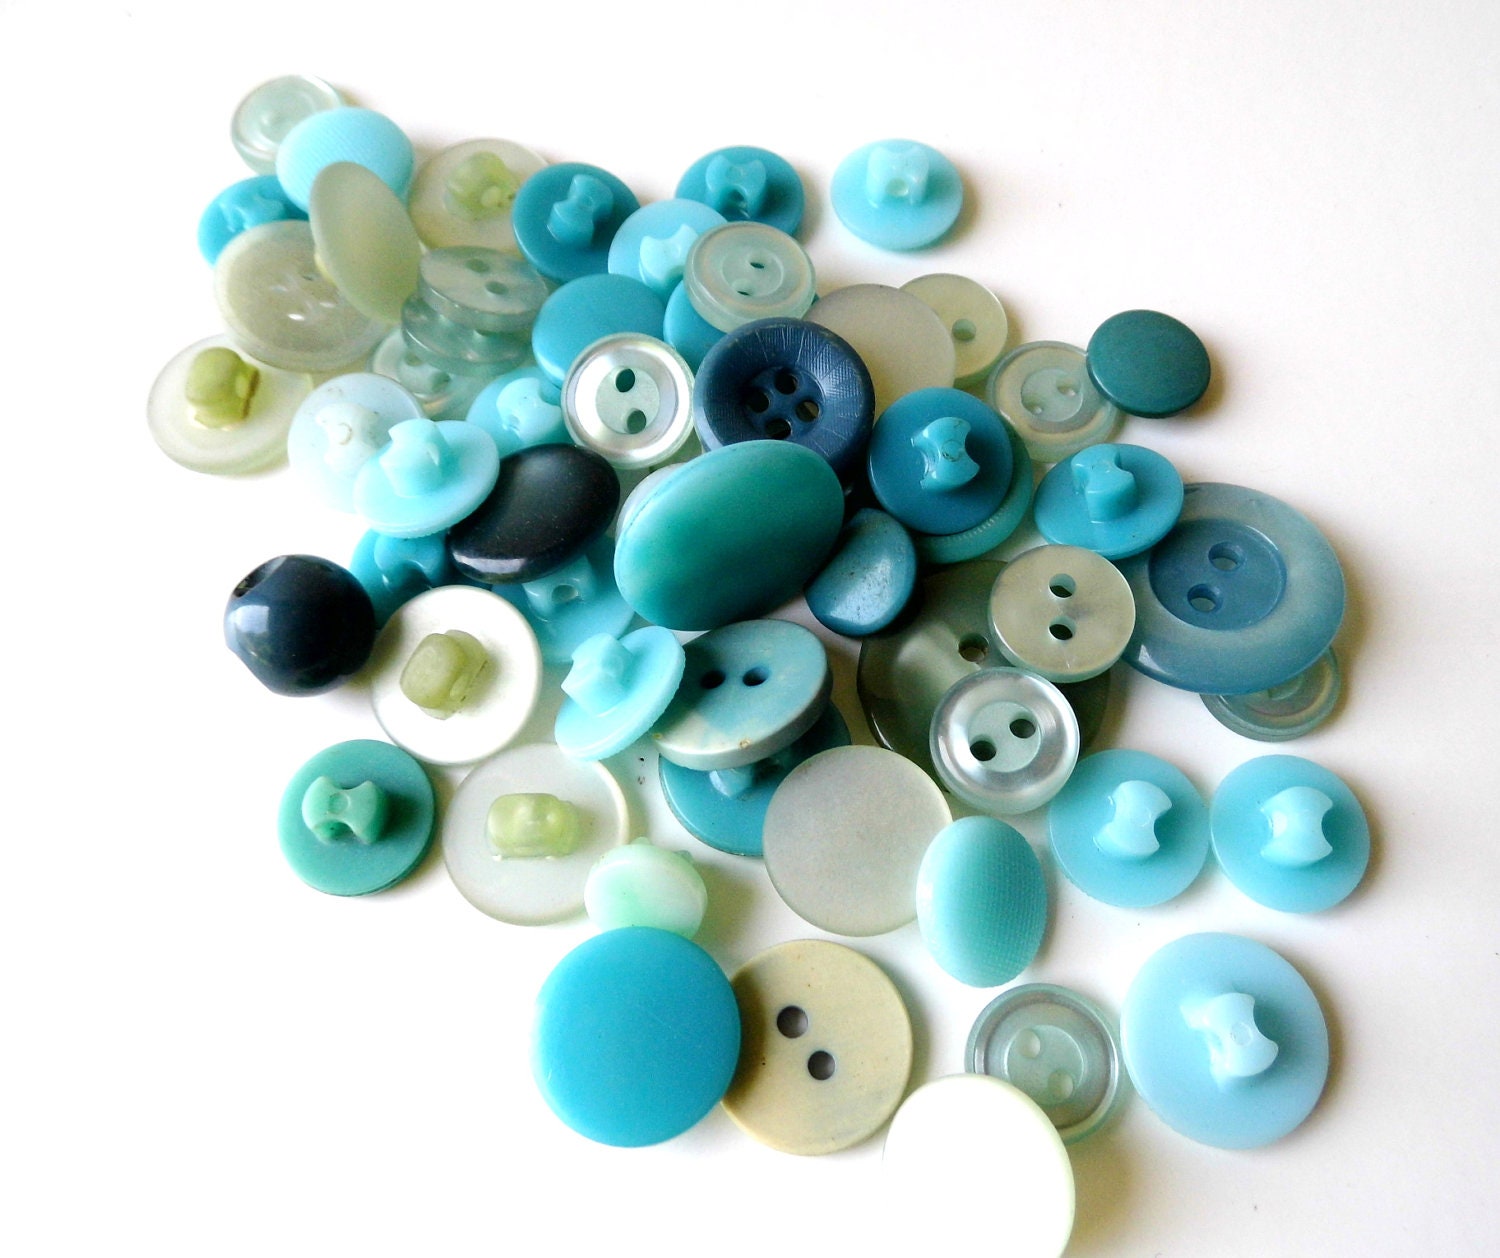 Vintage Teal, Green, Aqua Buttons, Various Hues, Tones and Sizes, 50 Plus pcs., Supplies from All Vintage Sewing - AllVintageSewing